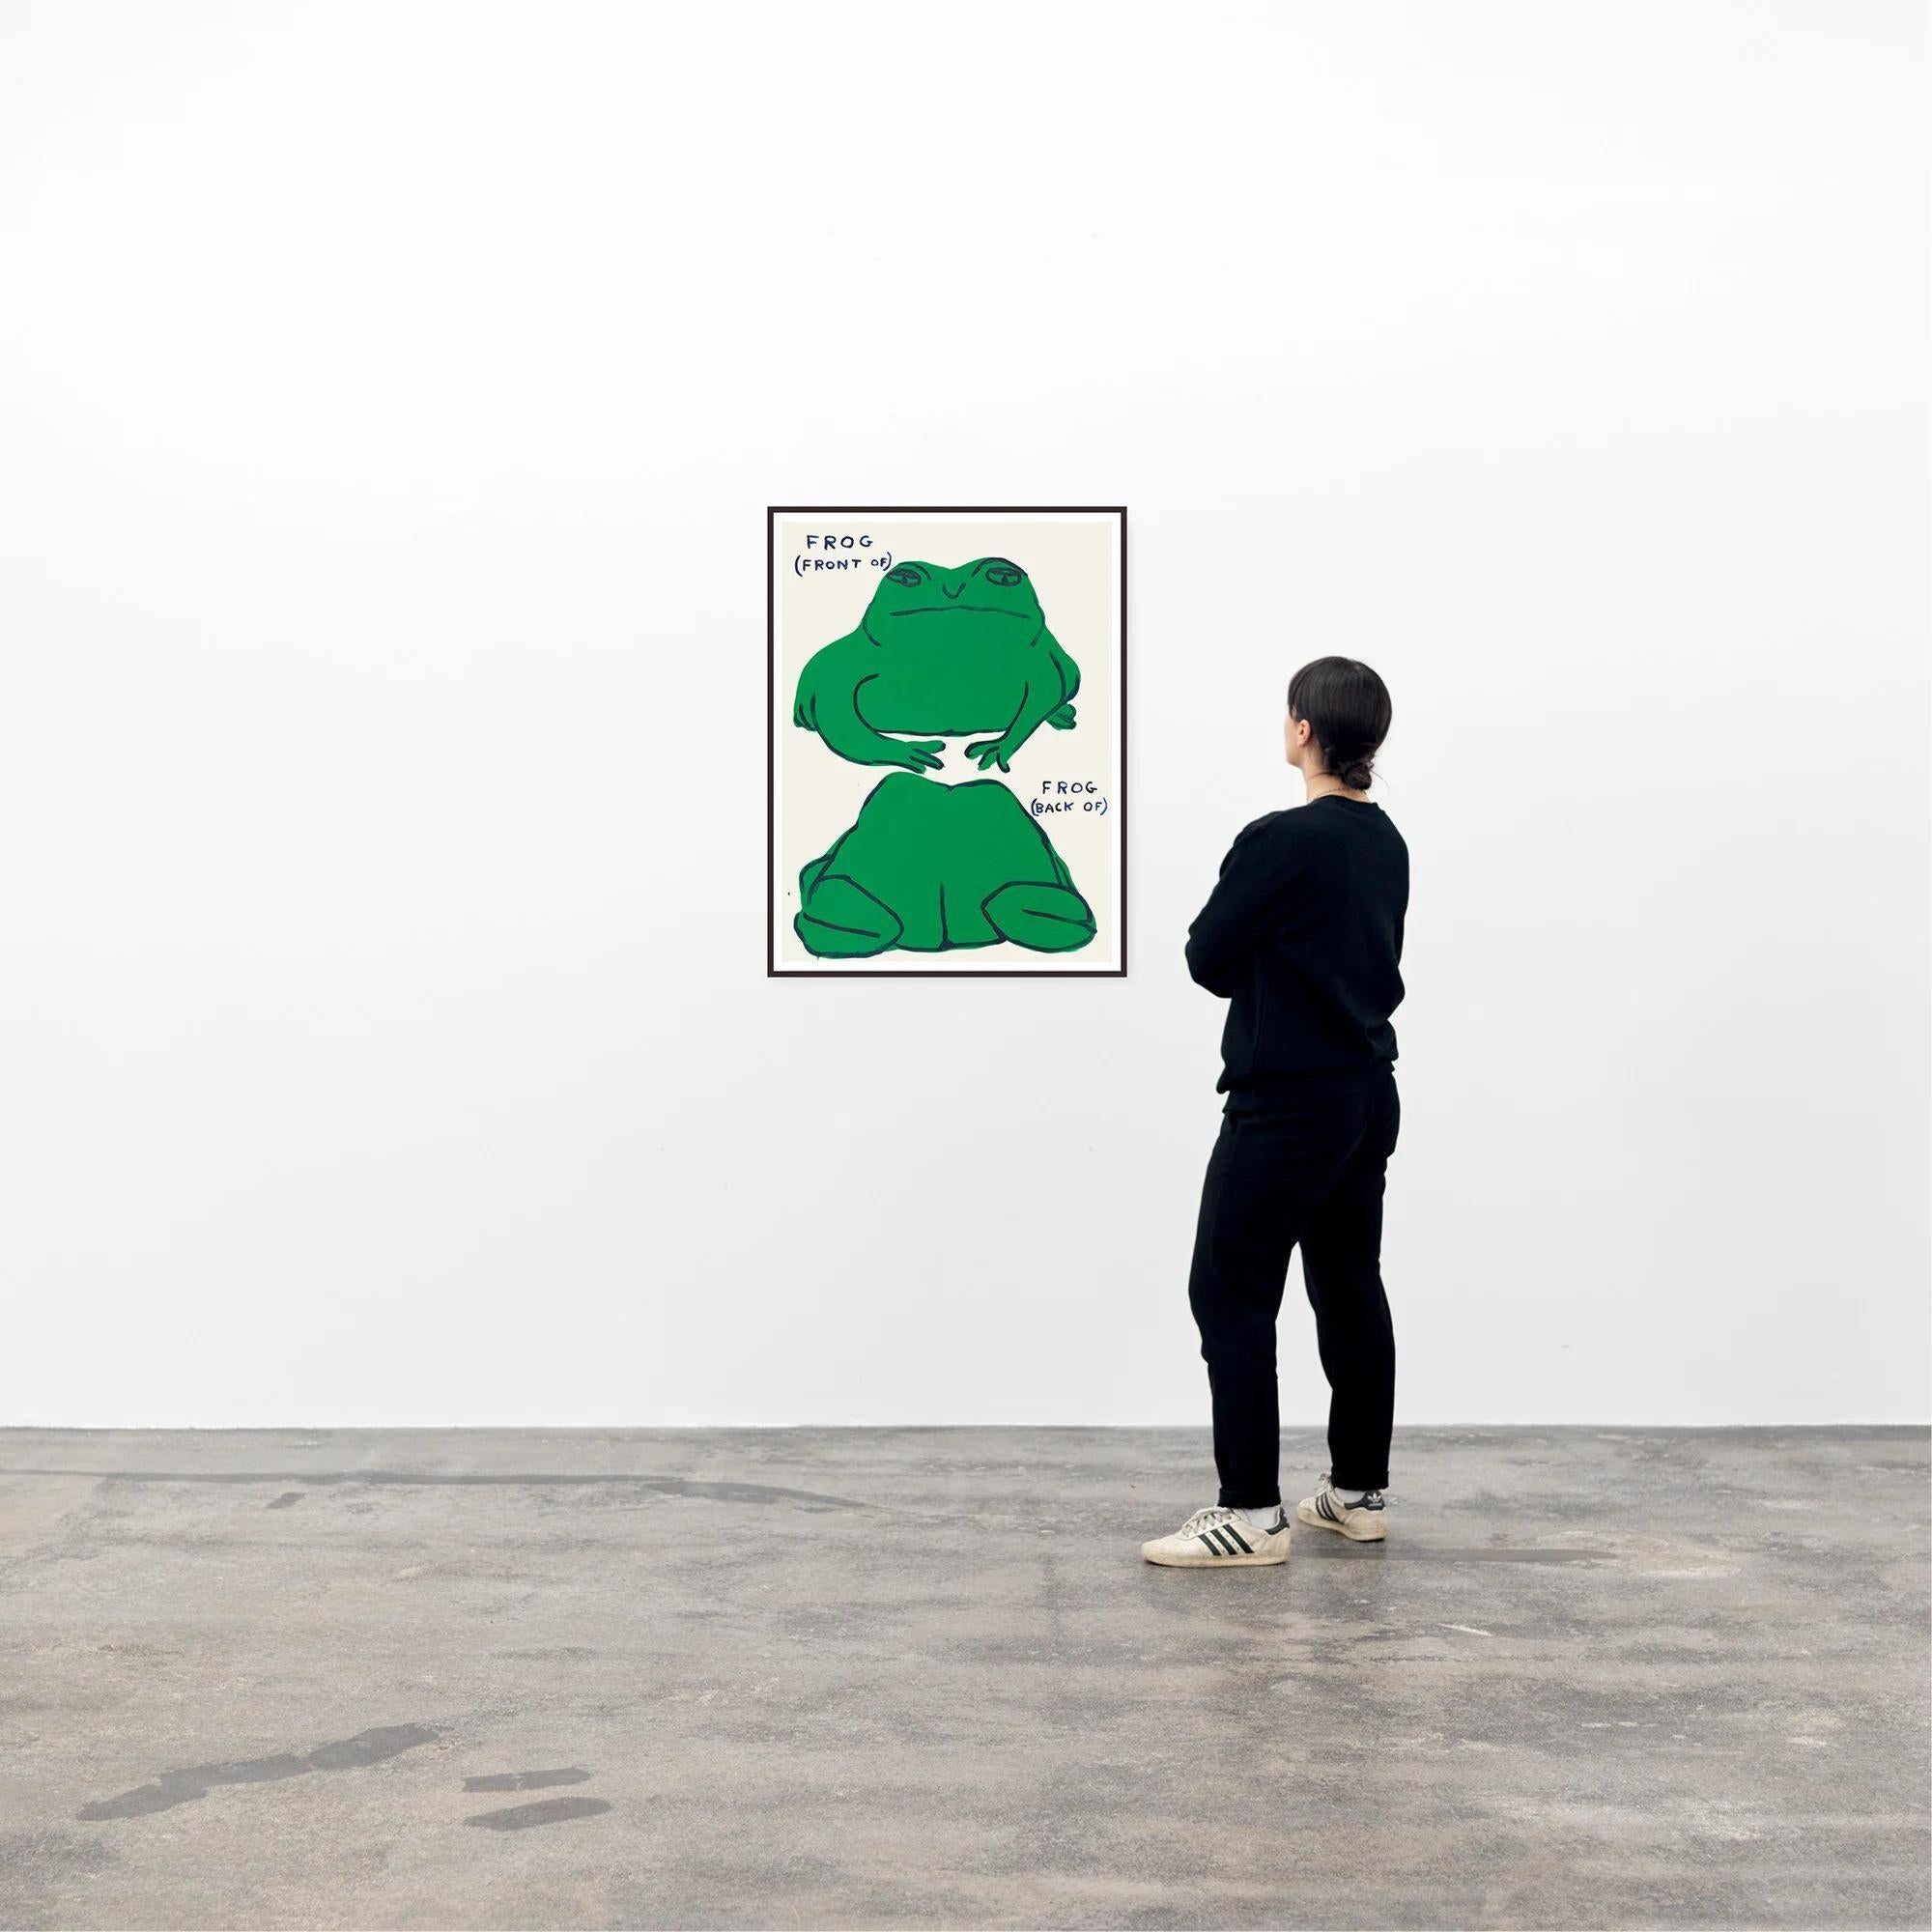 Frog (front of), Frog (back of) - Contemporary Print by David Shrigley